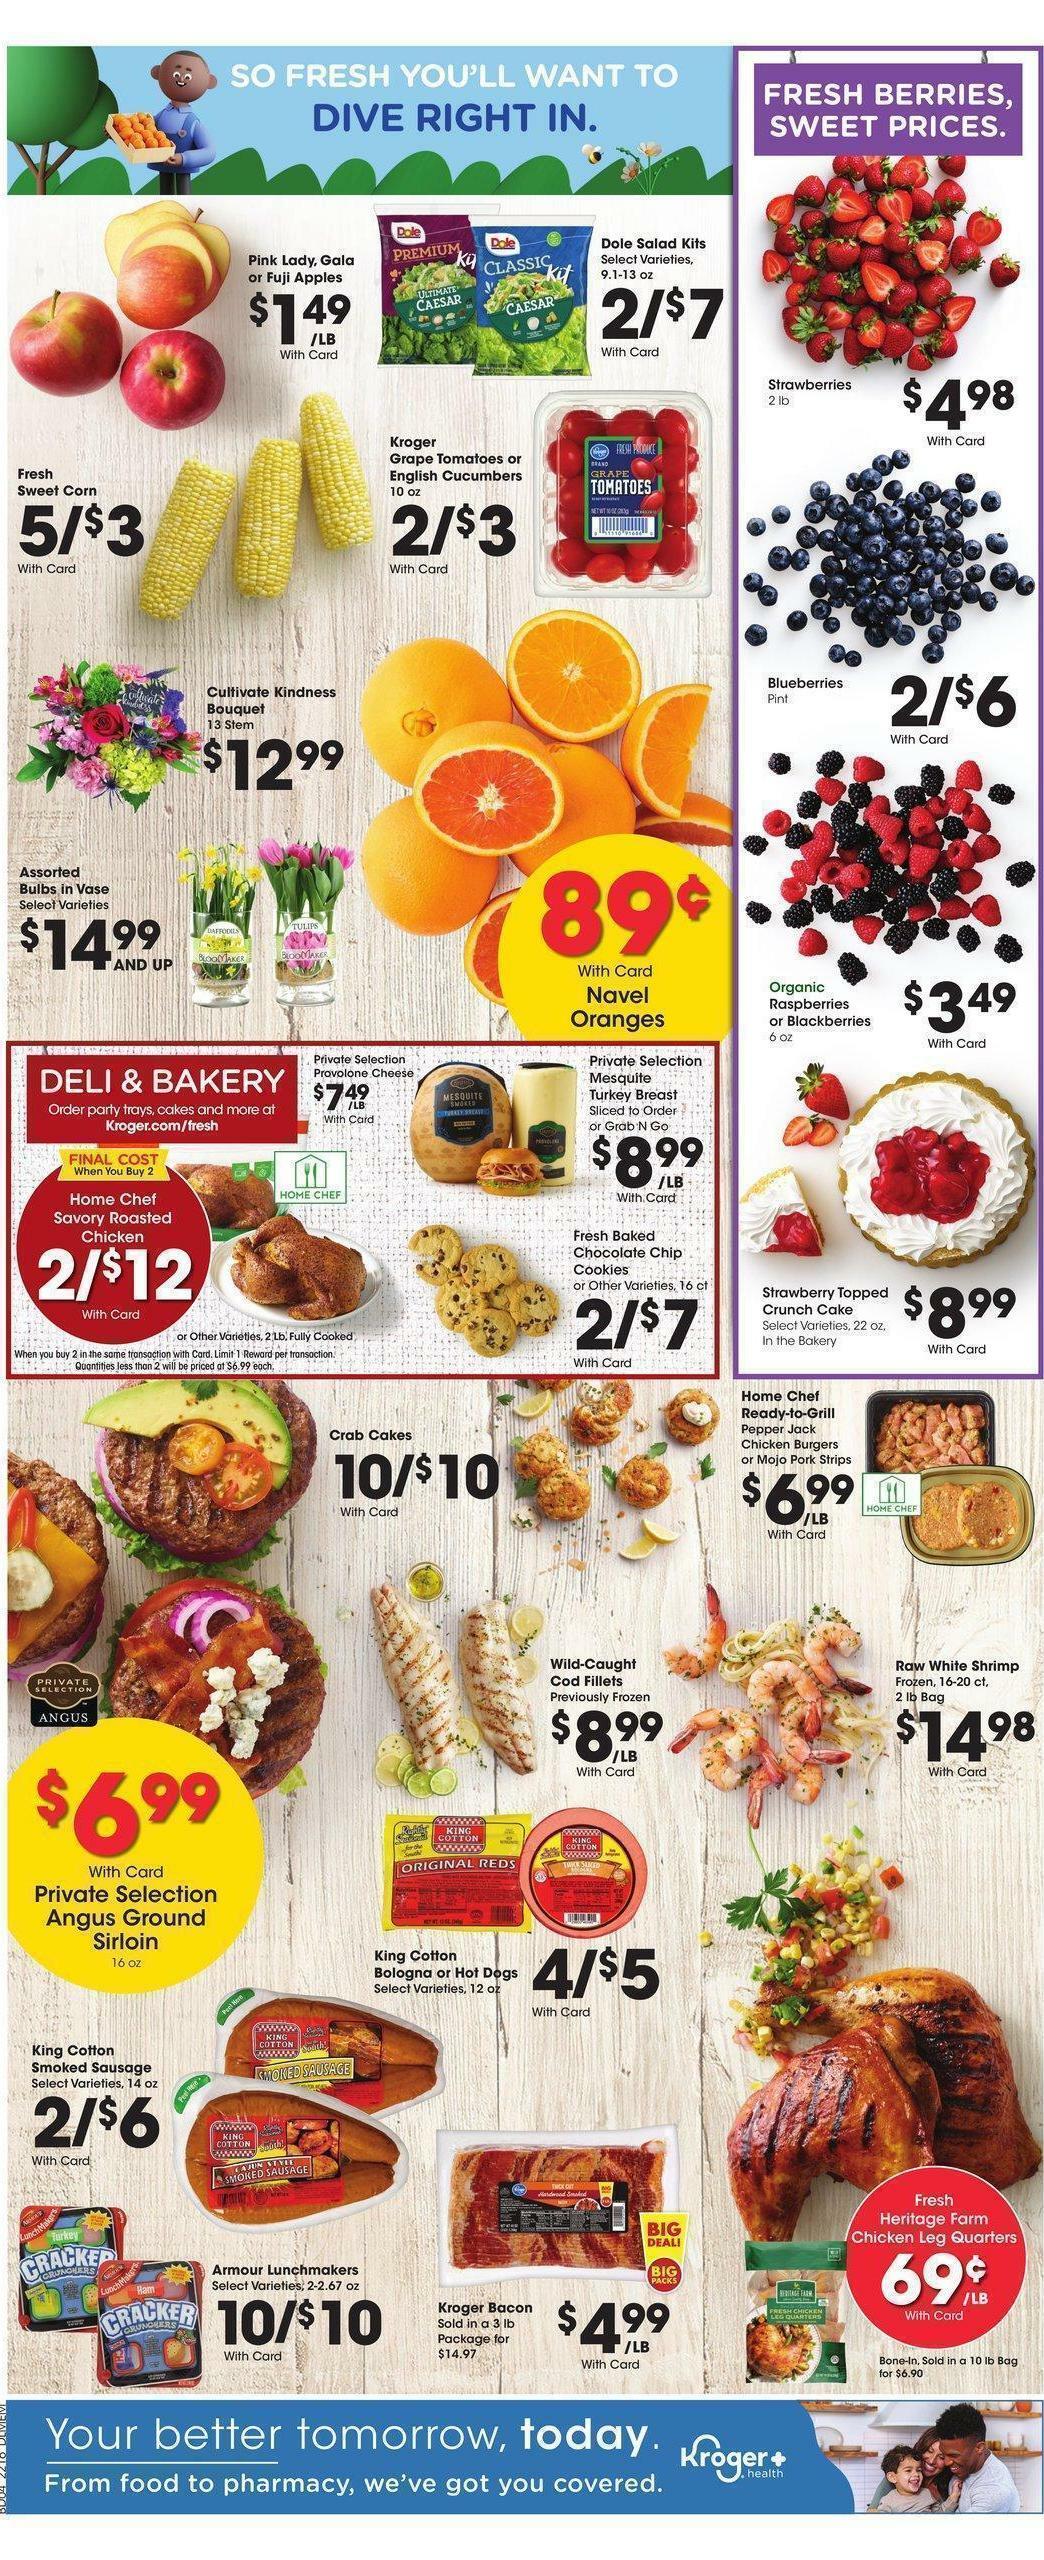 Kroger Weekly Ad from May 18